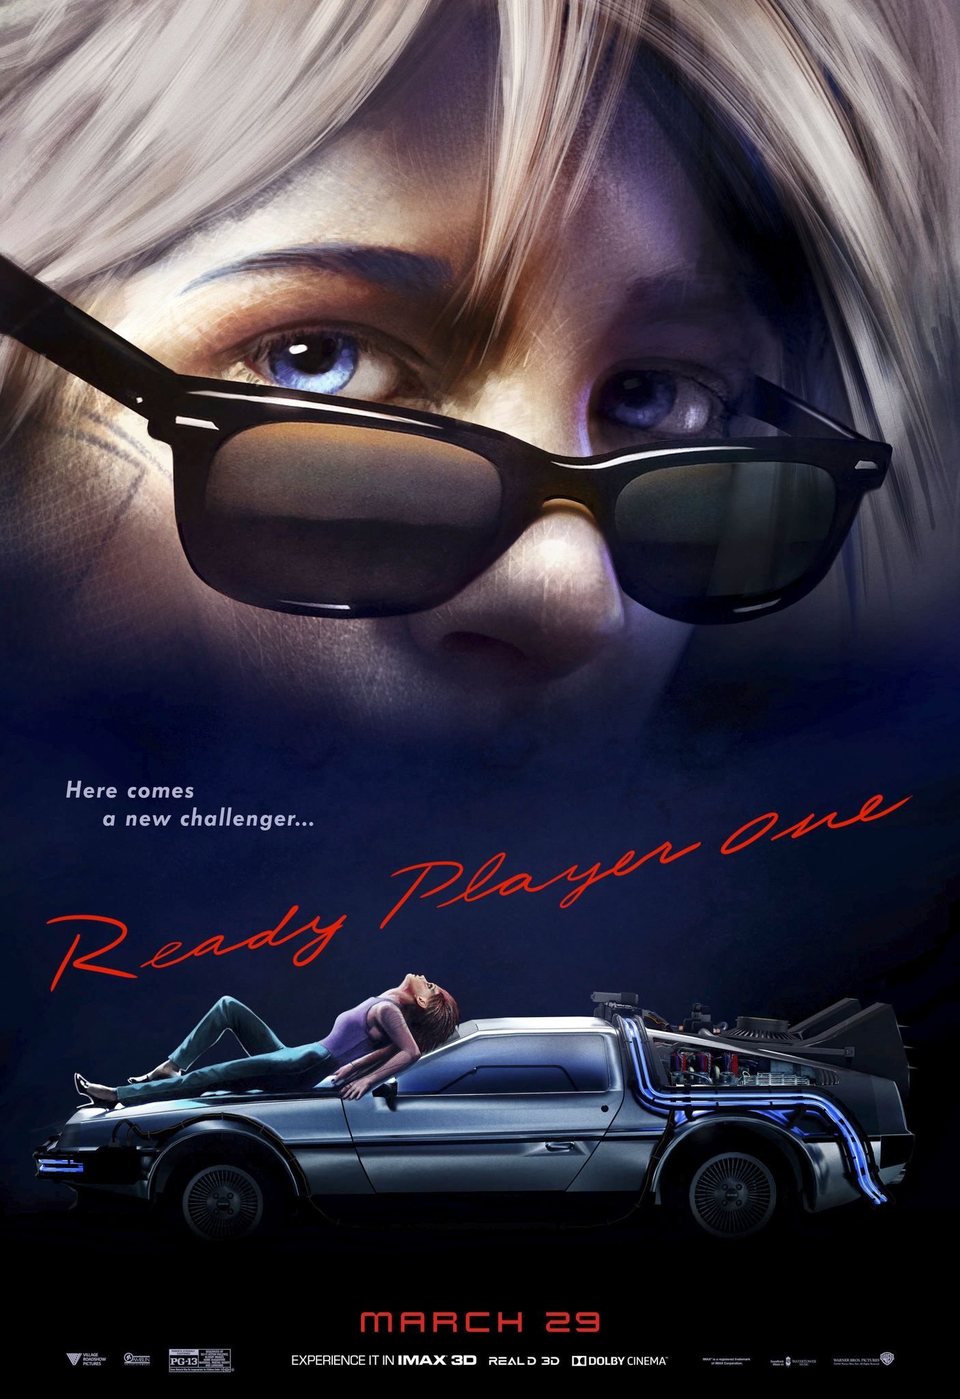 Cartel Ready Player One #9 de 'Ready Player One'